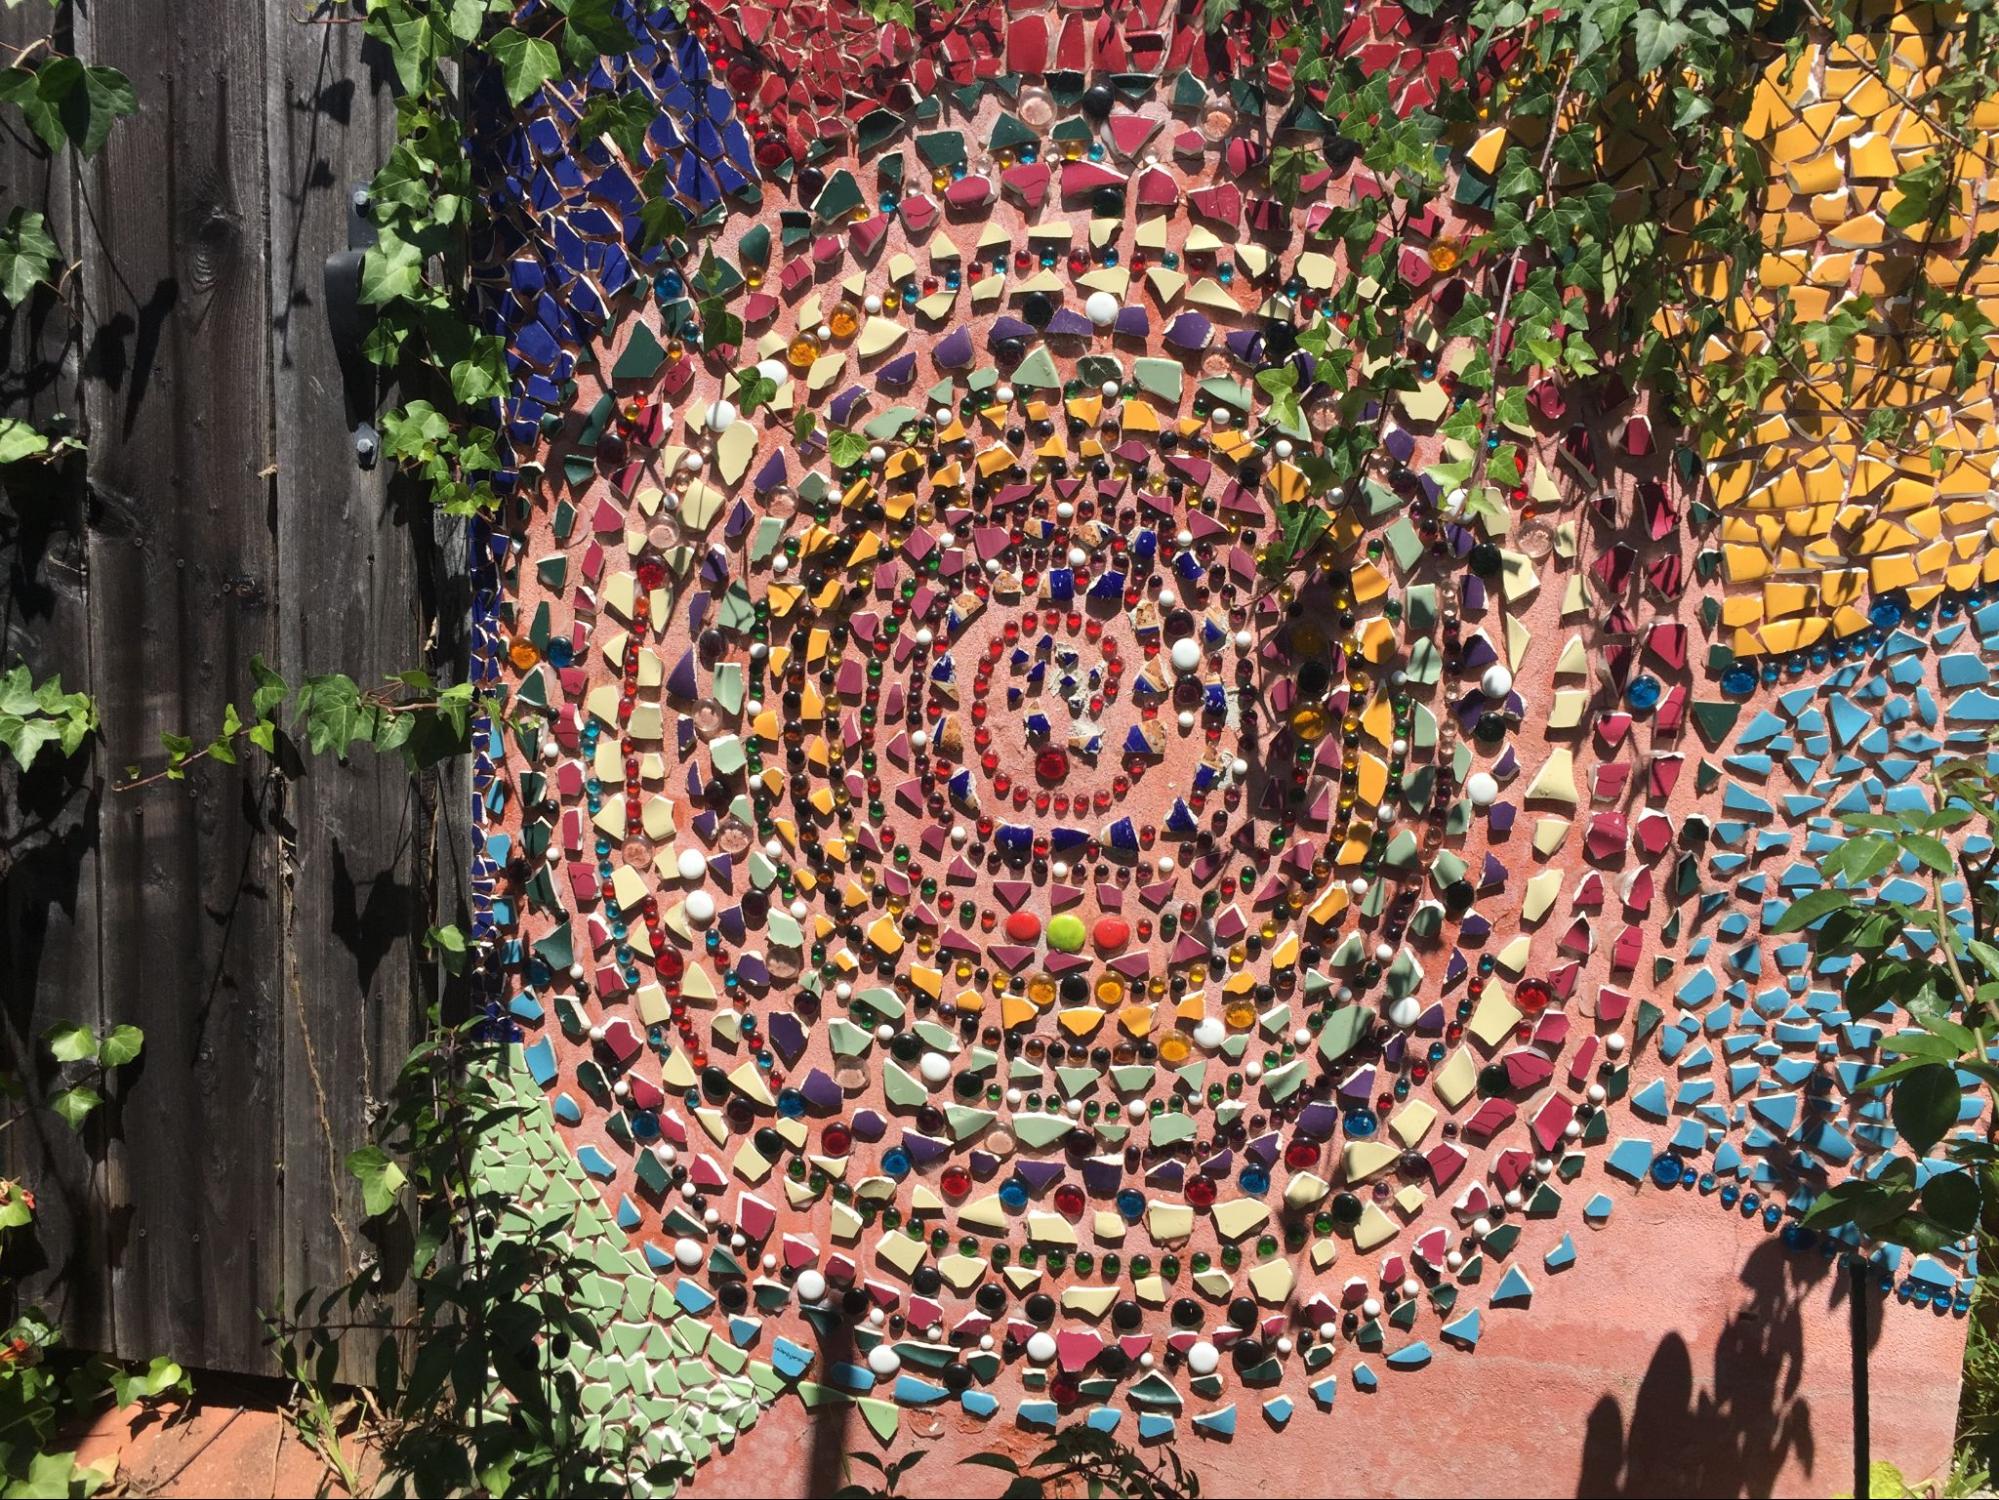 The spiral tiled holy wall in the garden